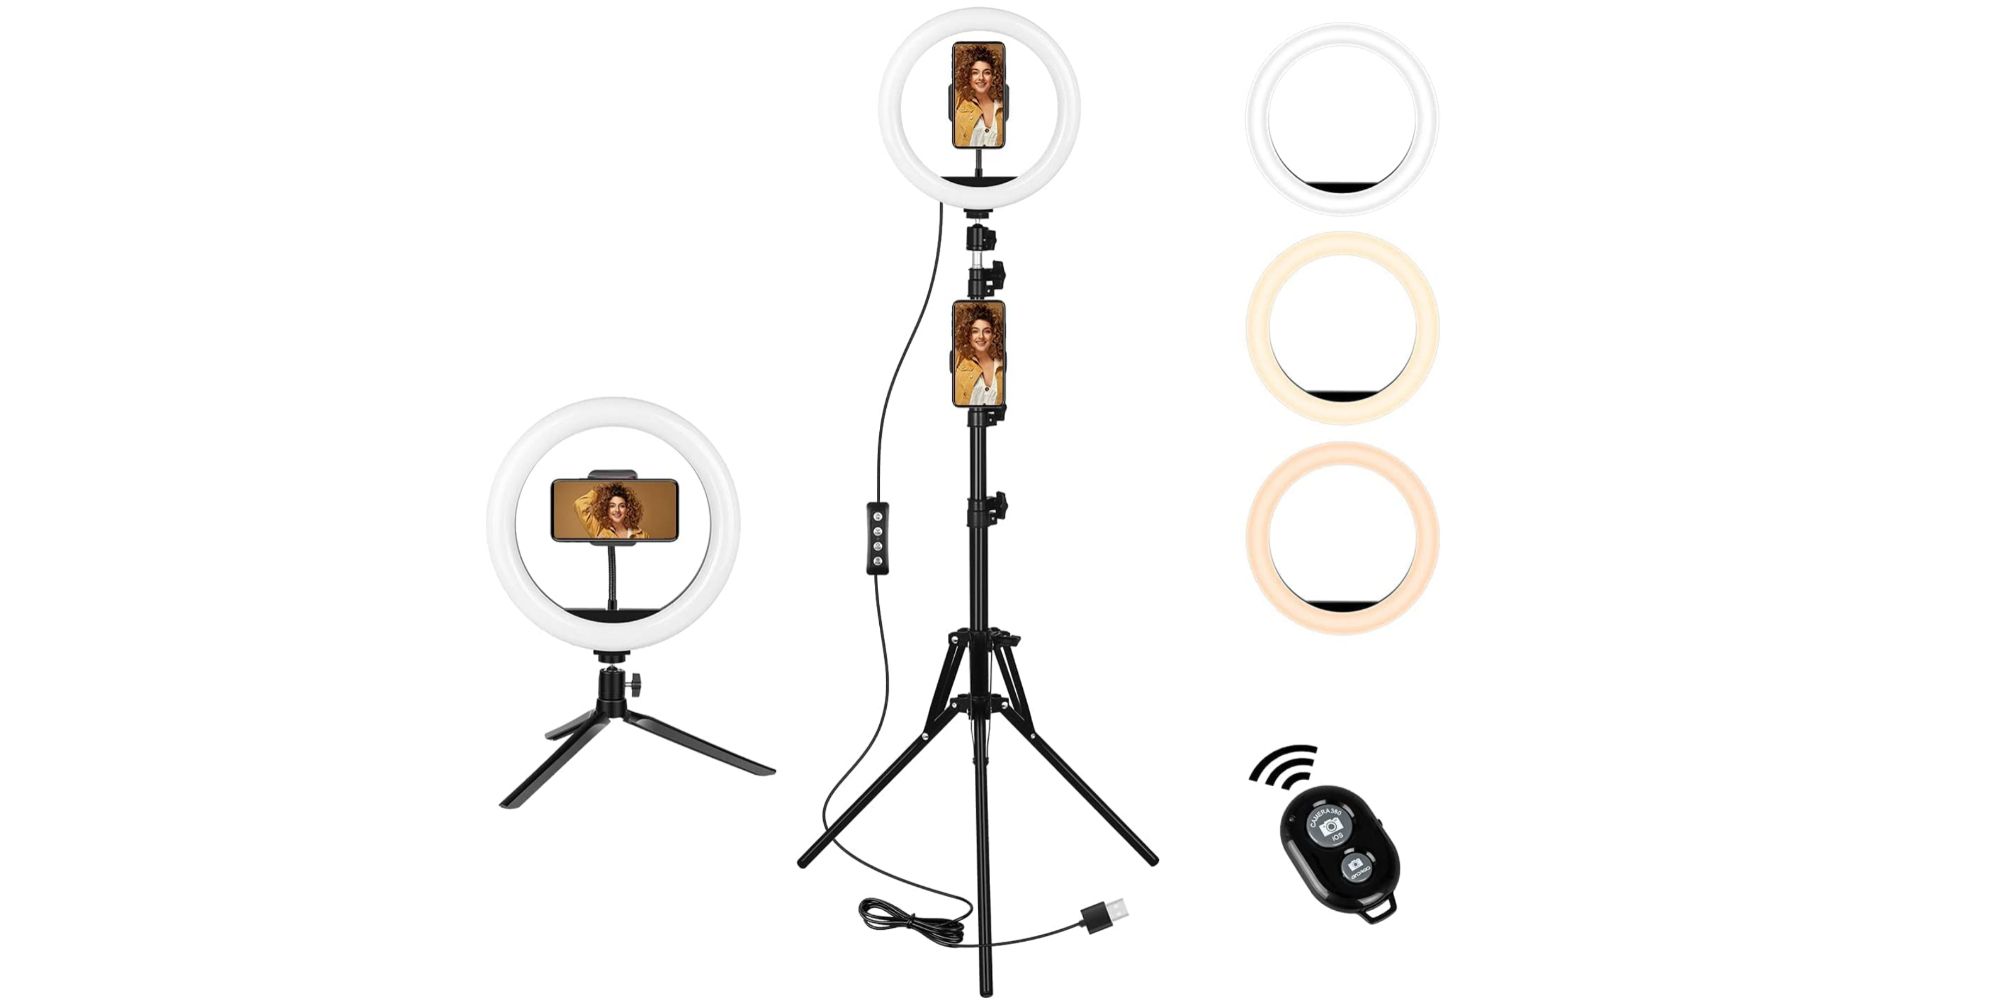 Ring Light with Stand from Amazon